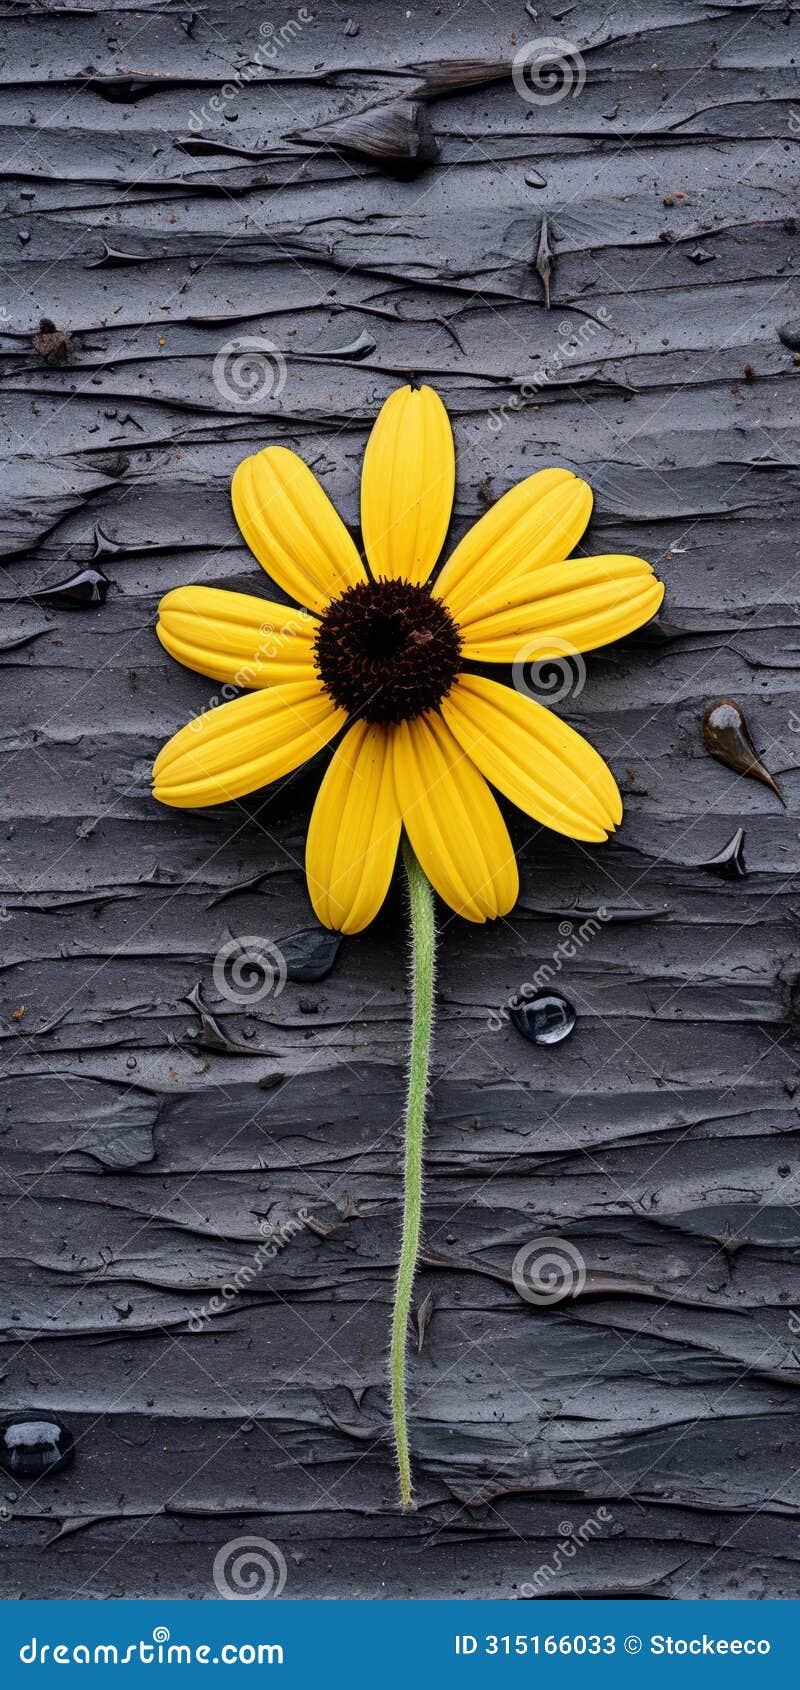 weathered materials: a visual delight of yellow flower on black background